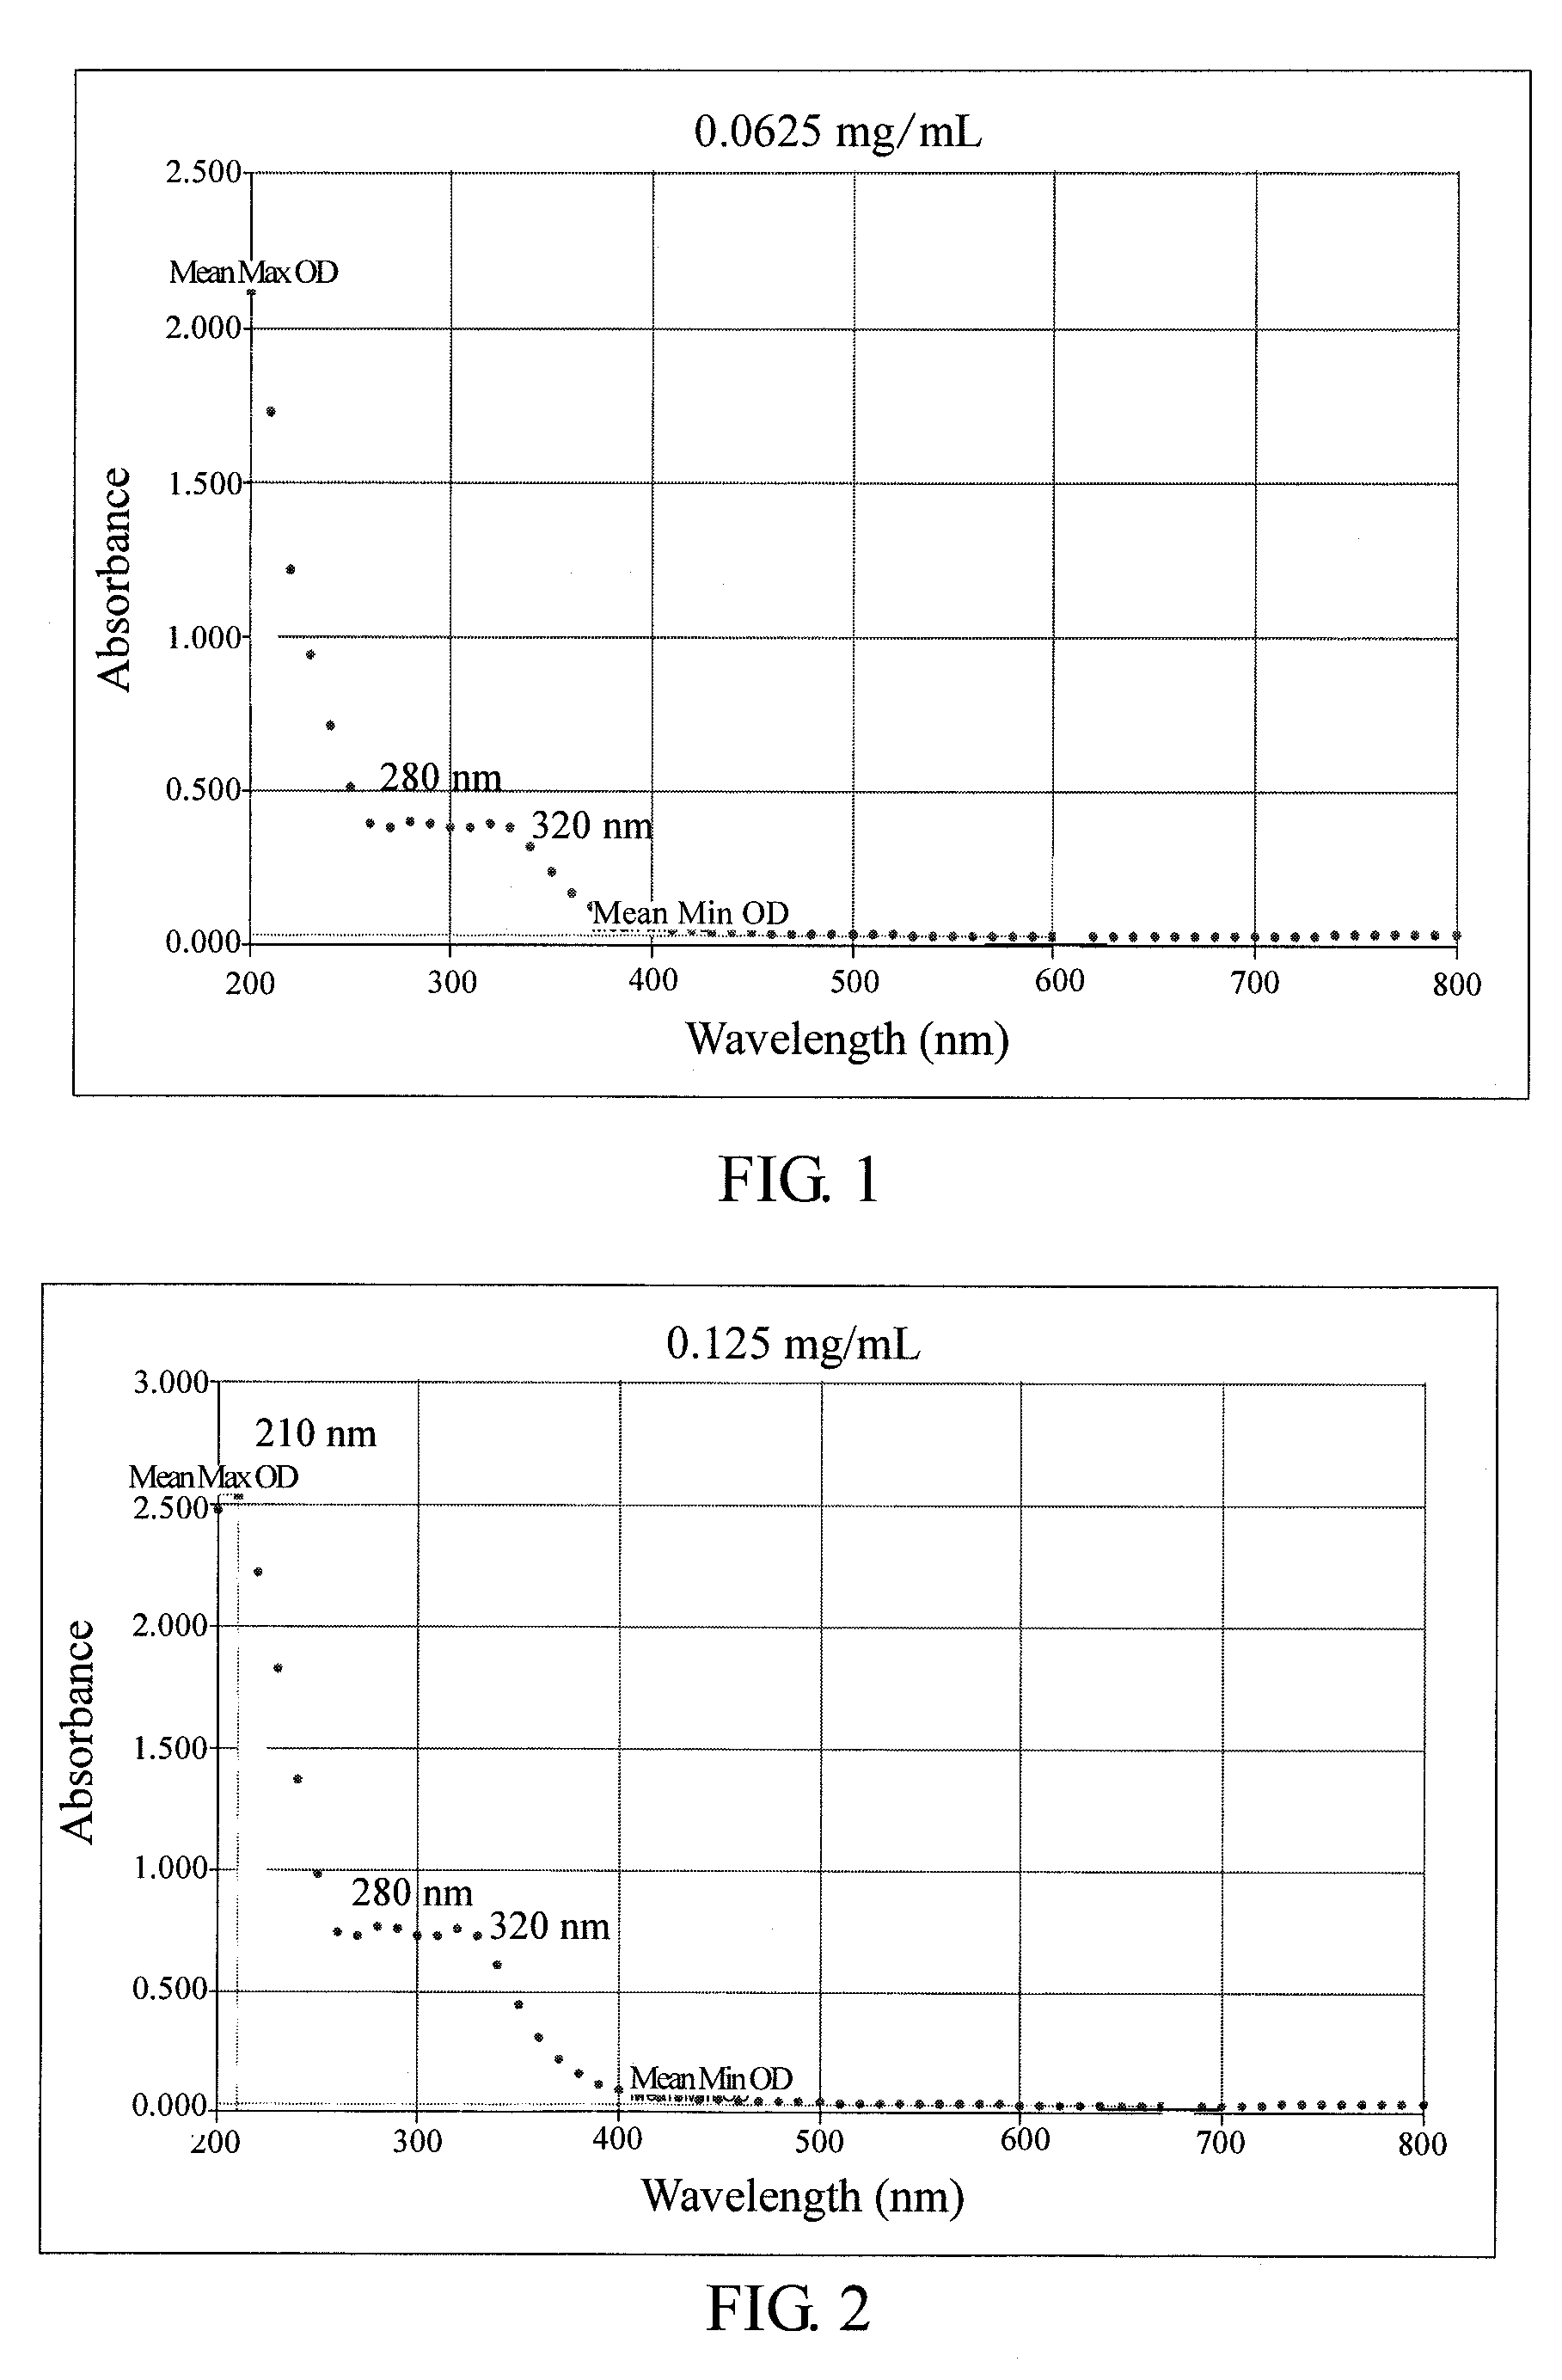 Method for anti-oxidation, inhibiting activity and/or expression of matrix metalloproteinase, and/or inhibiting phosphorylation of mitogen-activated protein kinase using neonauclea reticulata leaf extracts